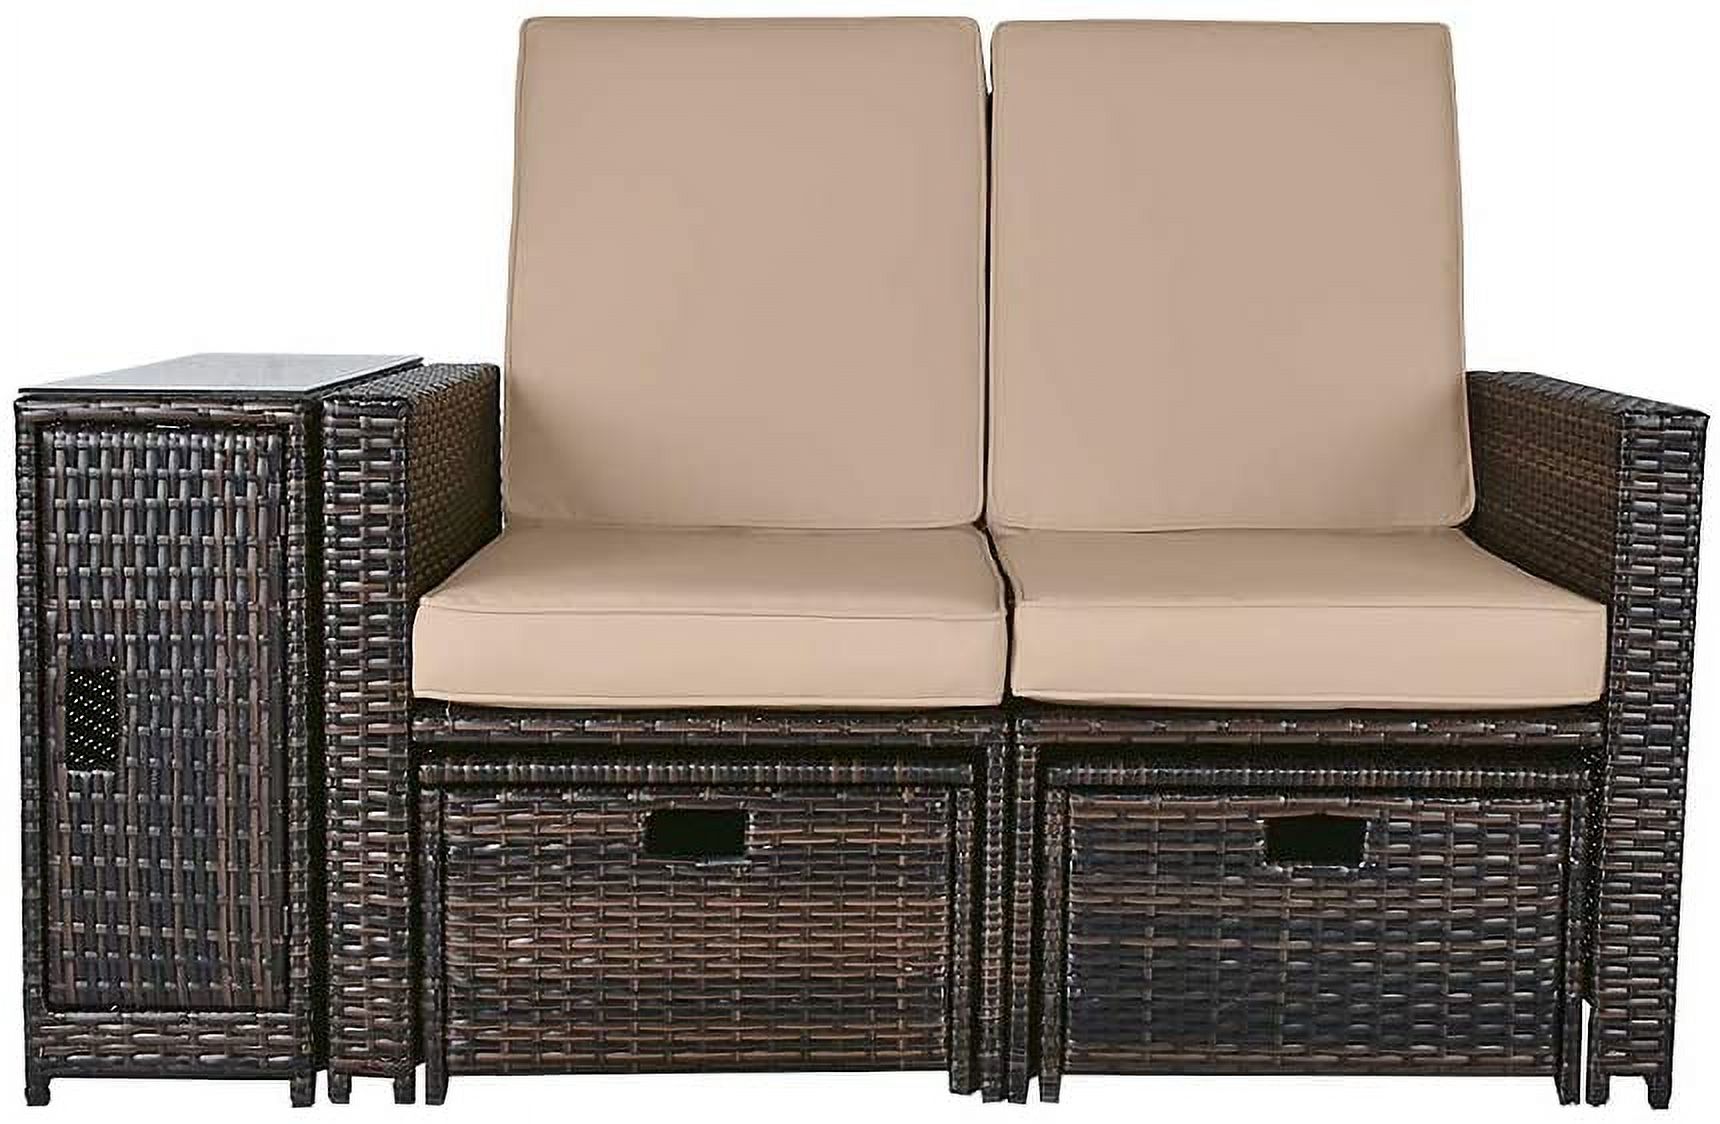 LVUYOYO 5pcs Patio Wicker Loveseat - Outdoor Rattan Sofa Set with Cushion - Wicker Furniture for Garden - image 1 of 7